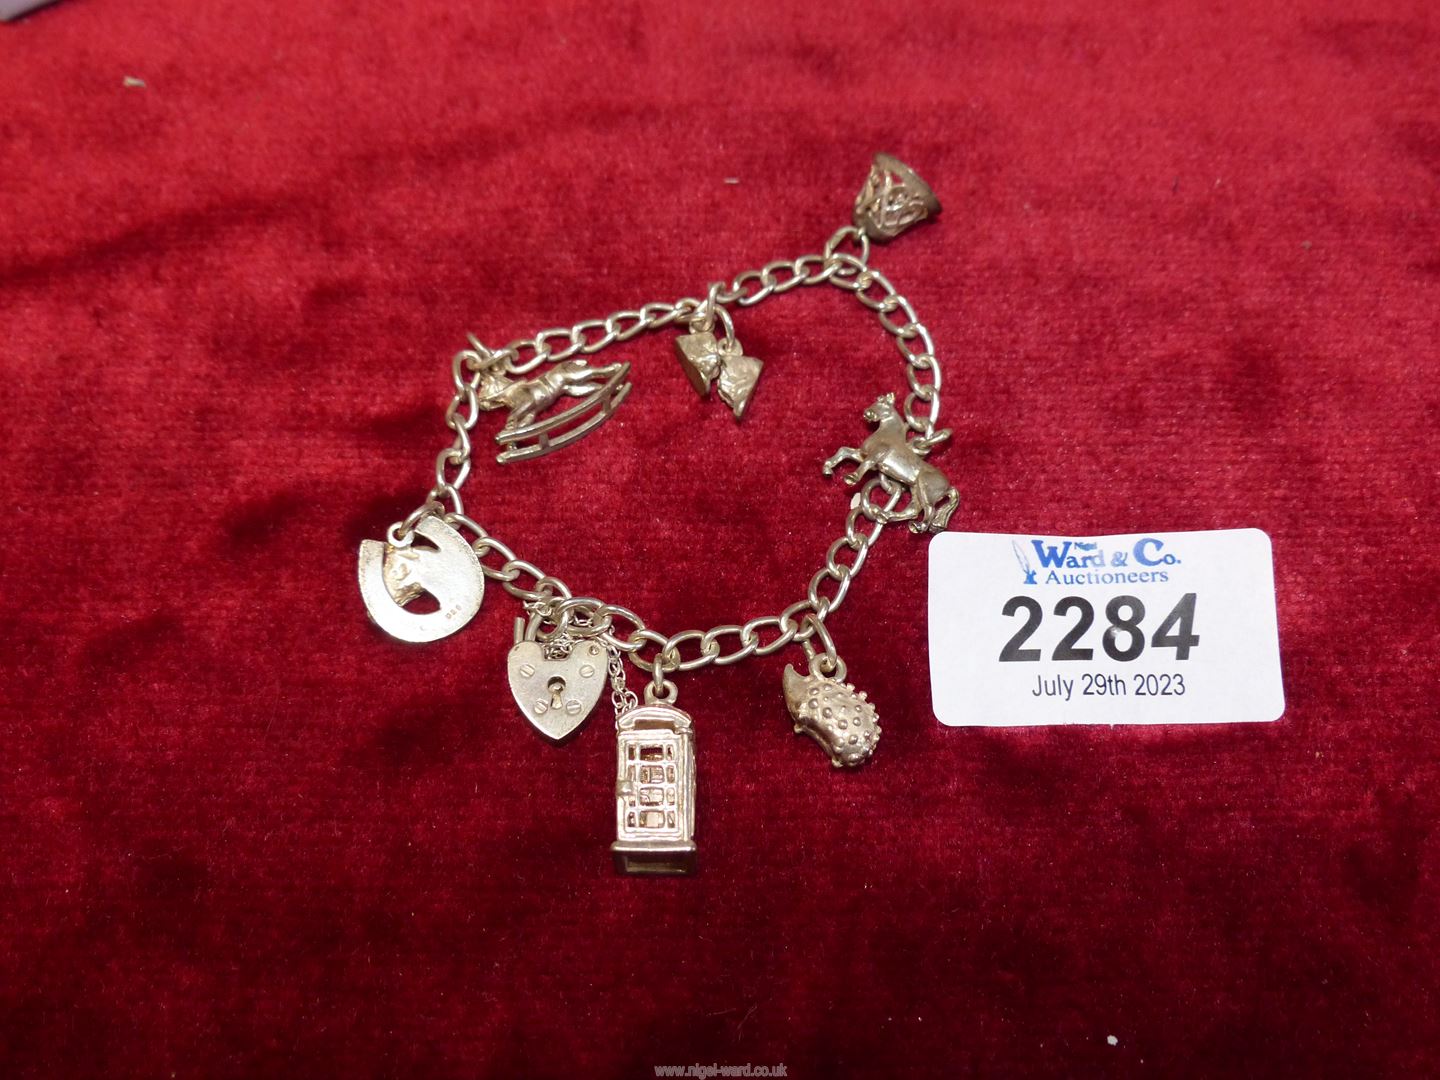 A silver charm bracelet with heart padlock clasp, charms including telephone kiosk, hedgehog, bell, - Image 2 of 2